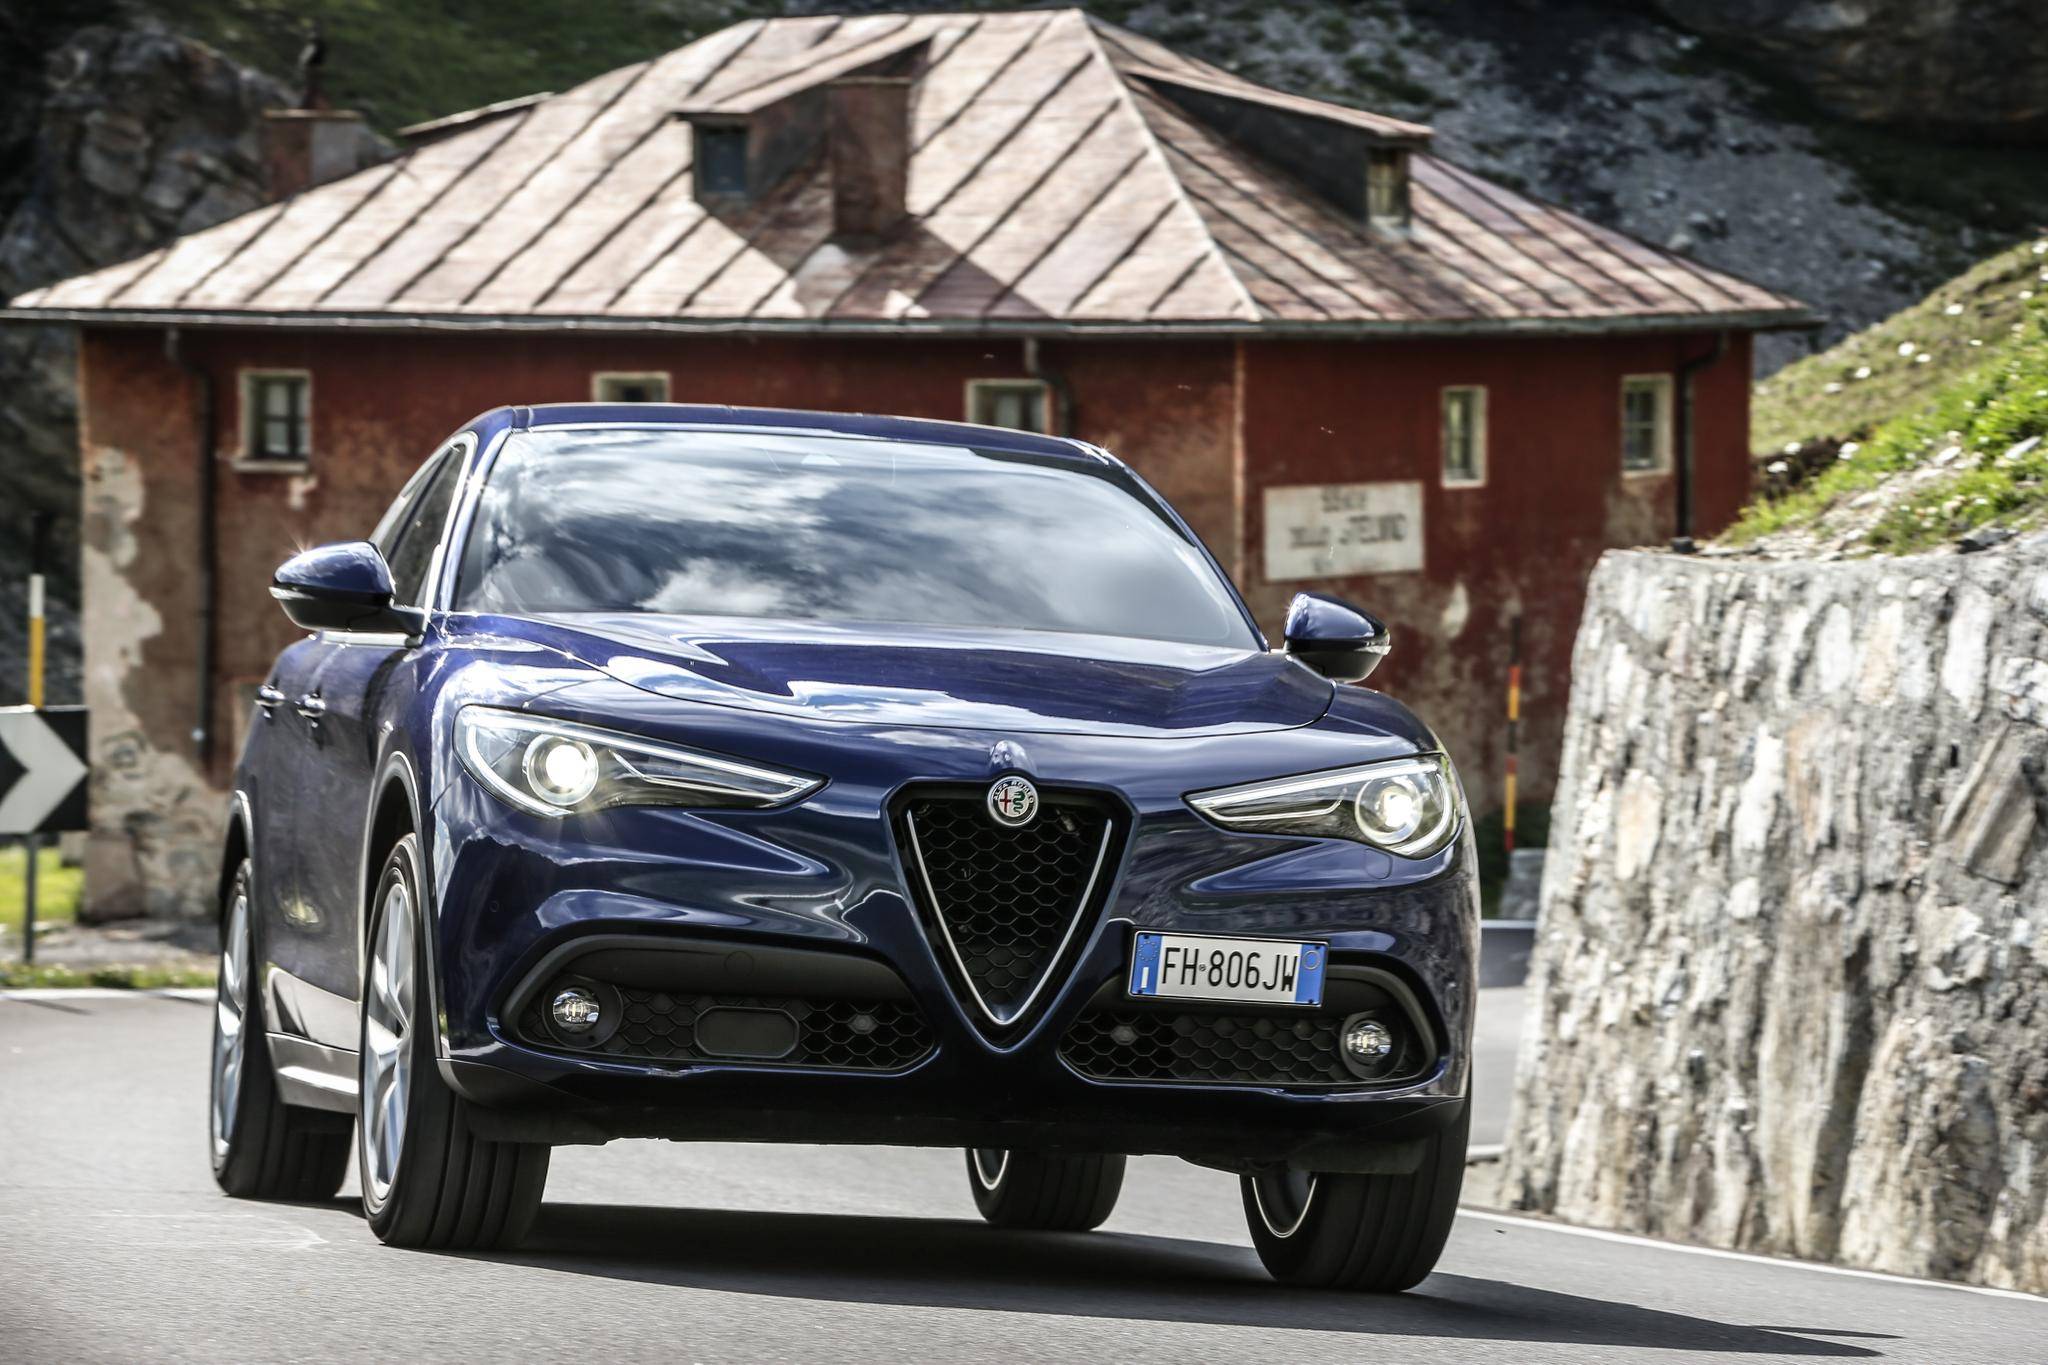 The 2018 Alfa Romeo Stelvio proves it has the underpinnings of a true  performance car - The Globe and Mail